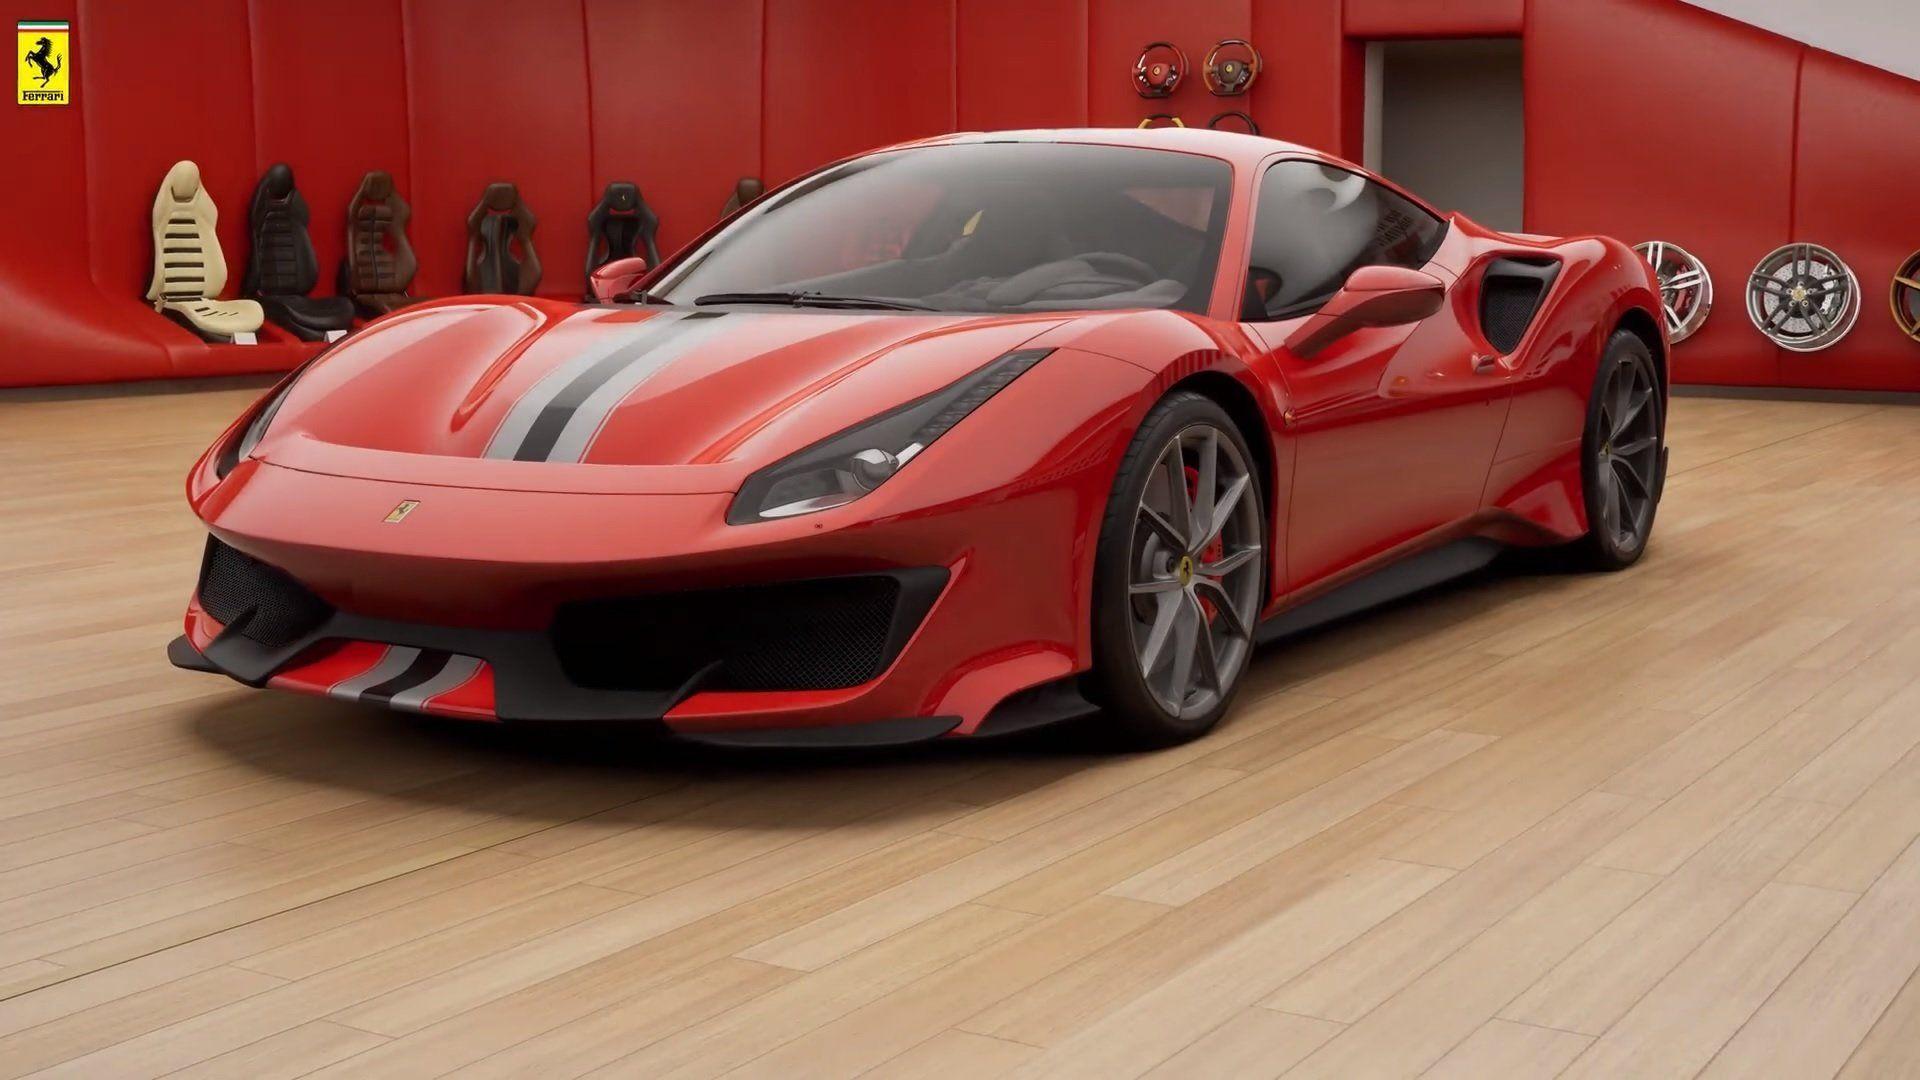 Ferrari 488 Pista Just Leaked, And It Looks Ready To Battle